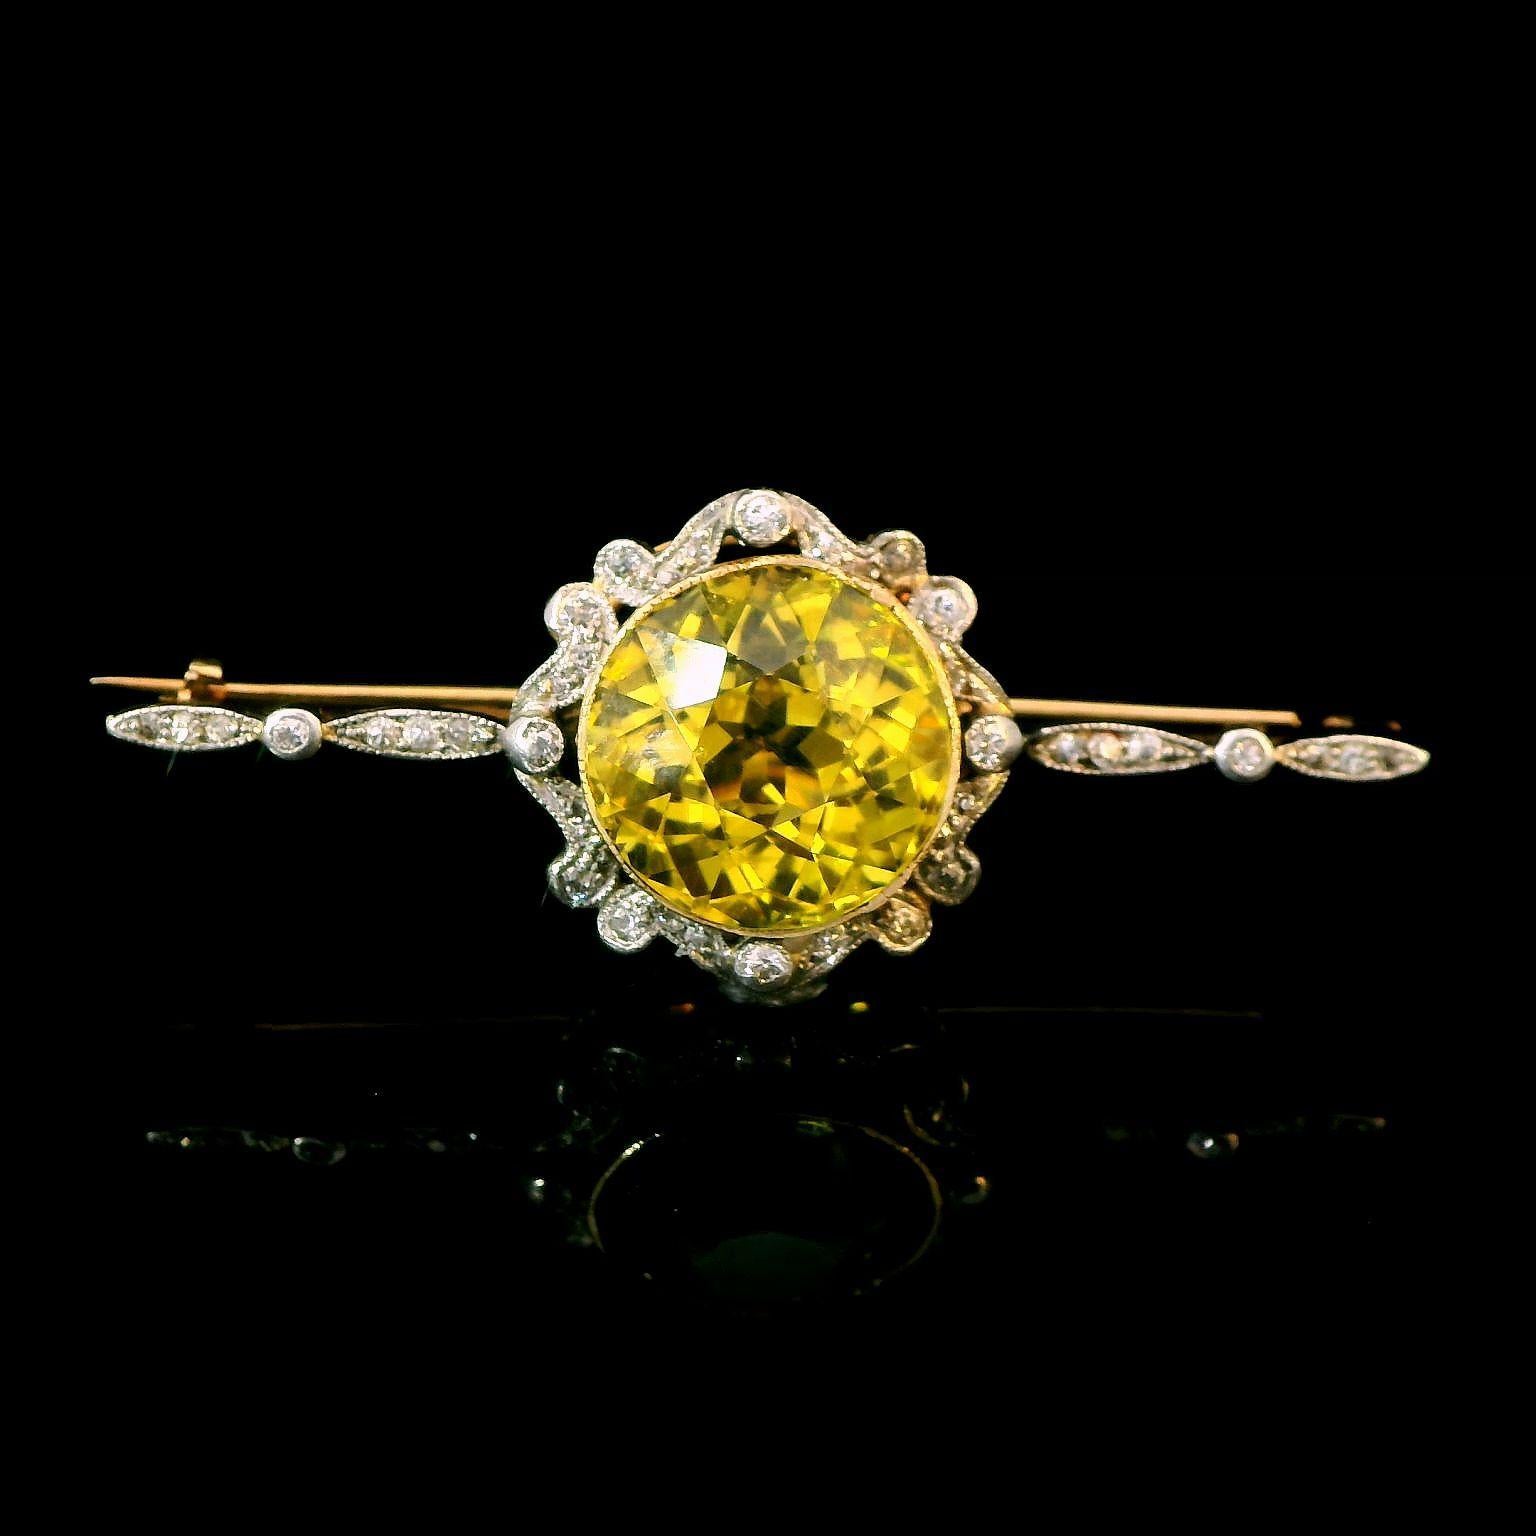 GIA Certified 9.65 Carat Yellow Sapphire and Diamond Art Deco 18K Gold Brooch In Good Condition For Sale In New York, NY